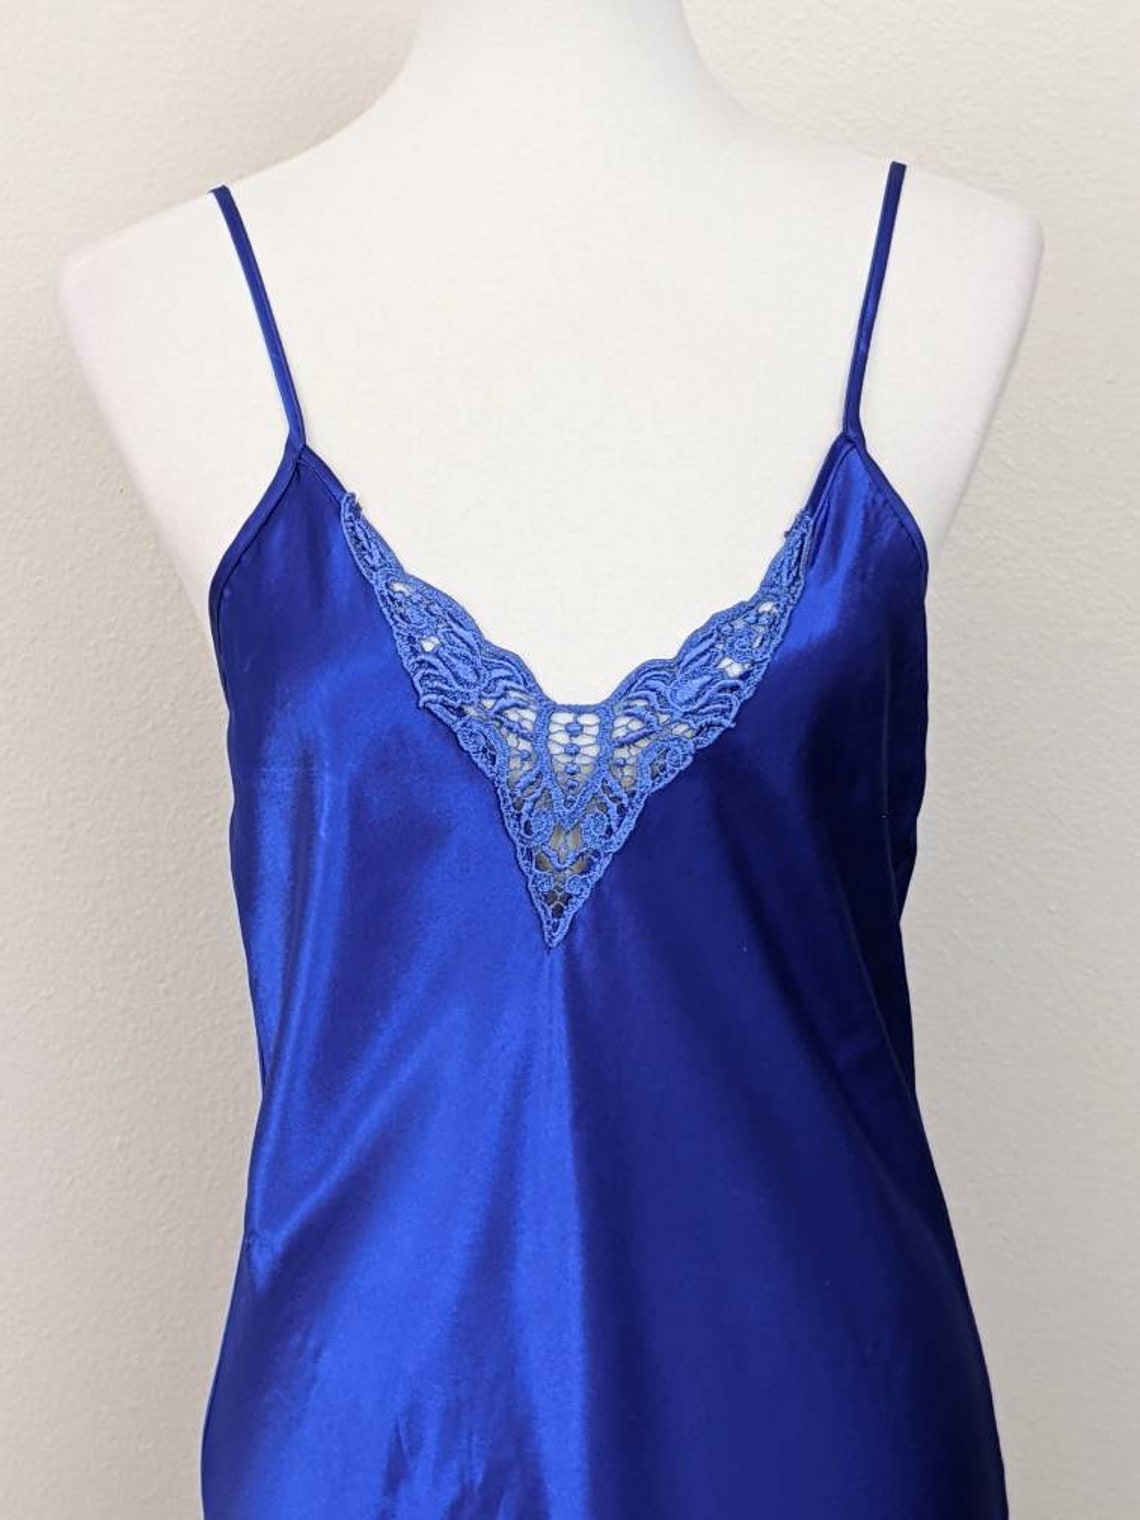 Nightgown Blue Long Vintage Lingerie Ankle Satin Sleep | Etsy